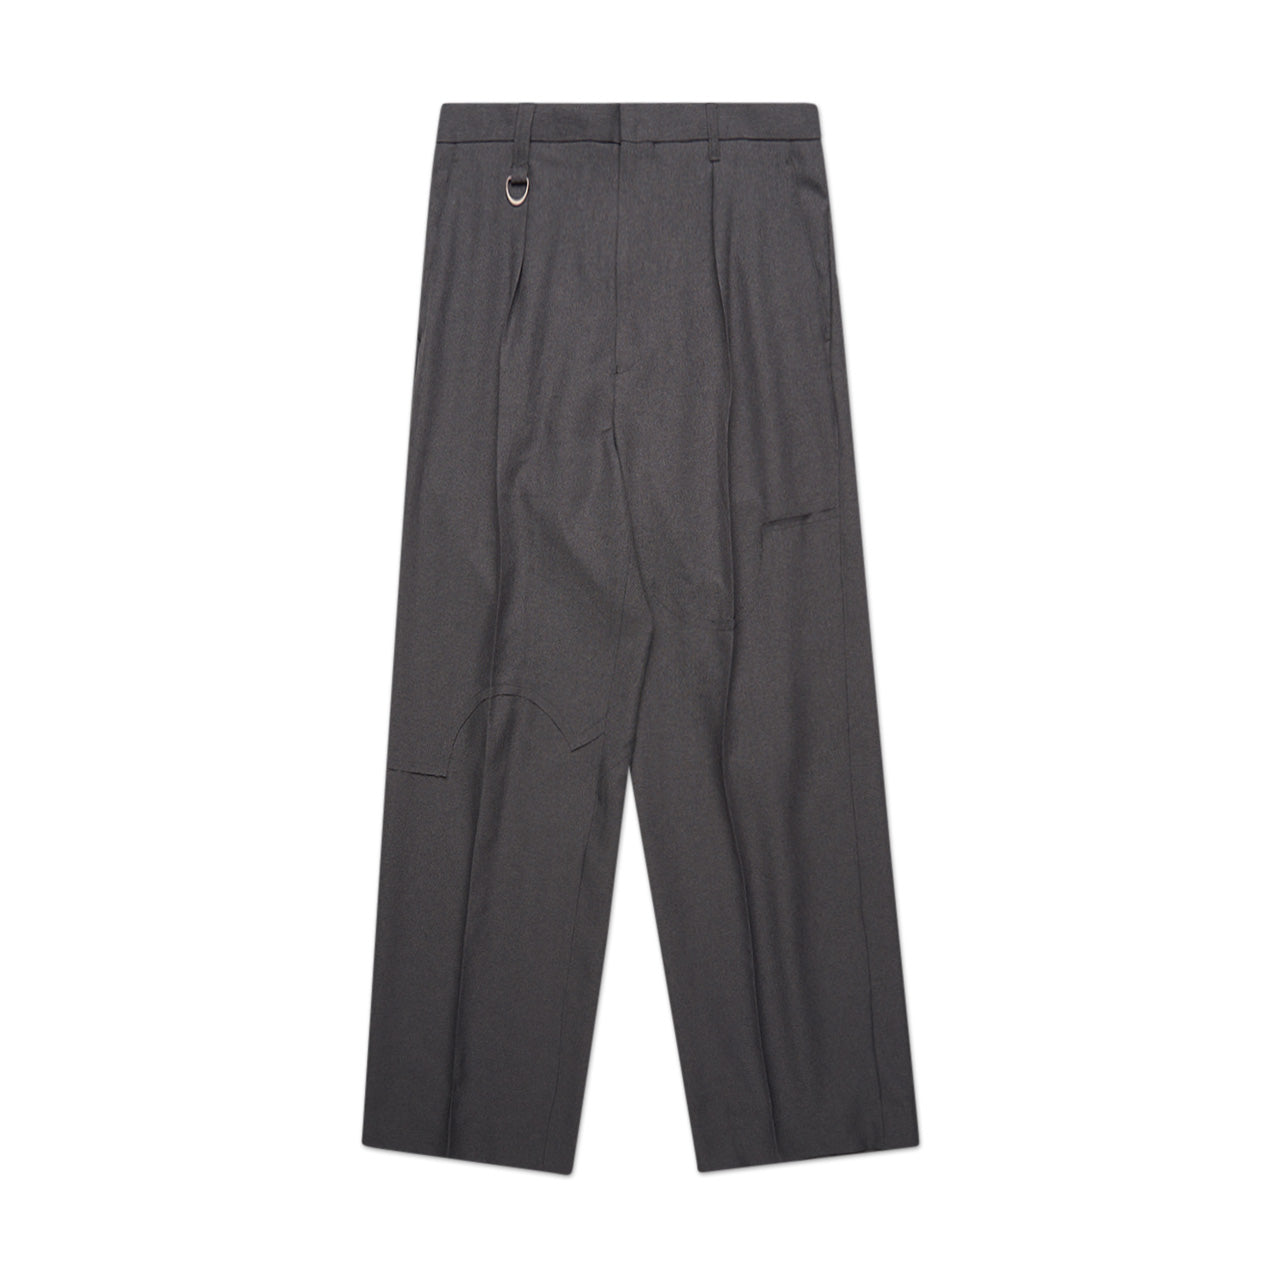 undercover undercover deconstructed panel dress pants (grey)